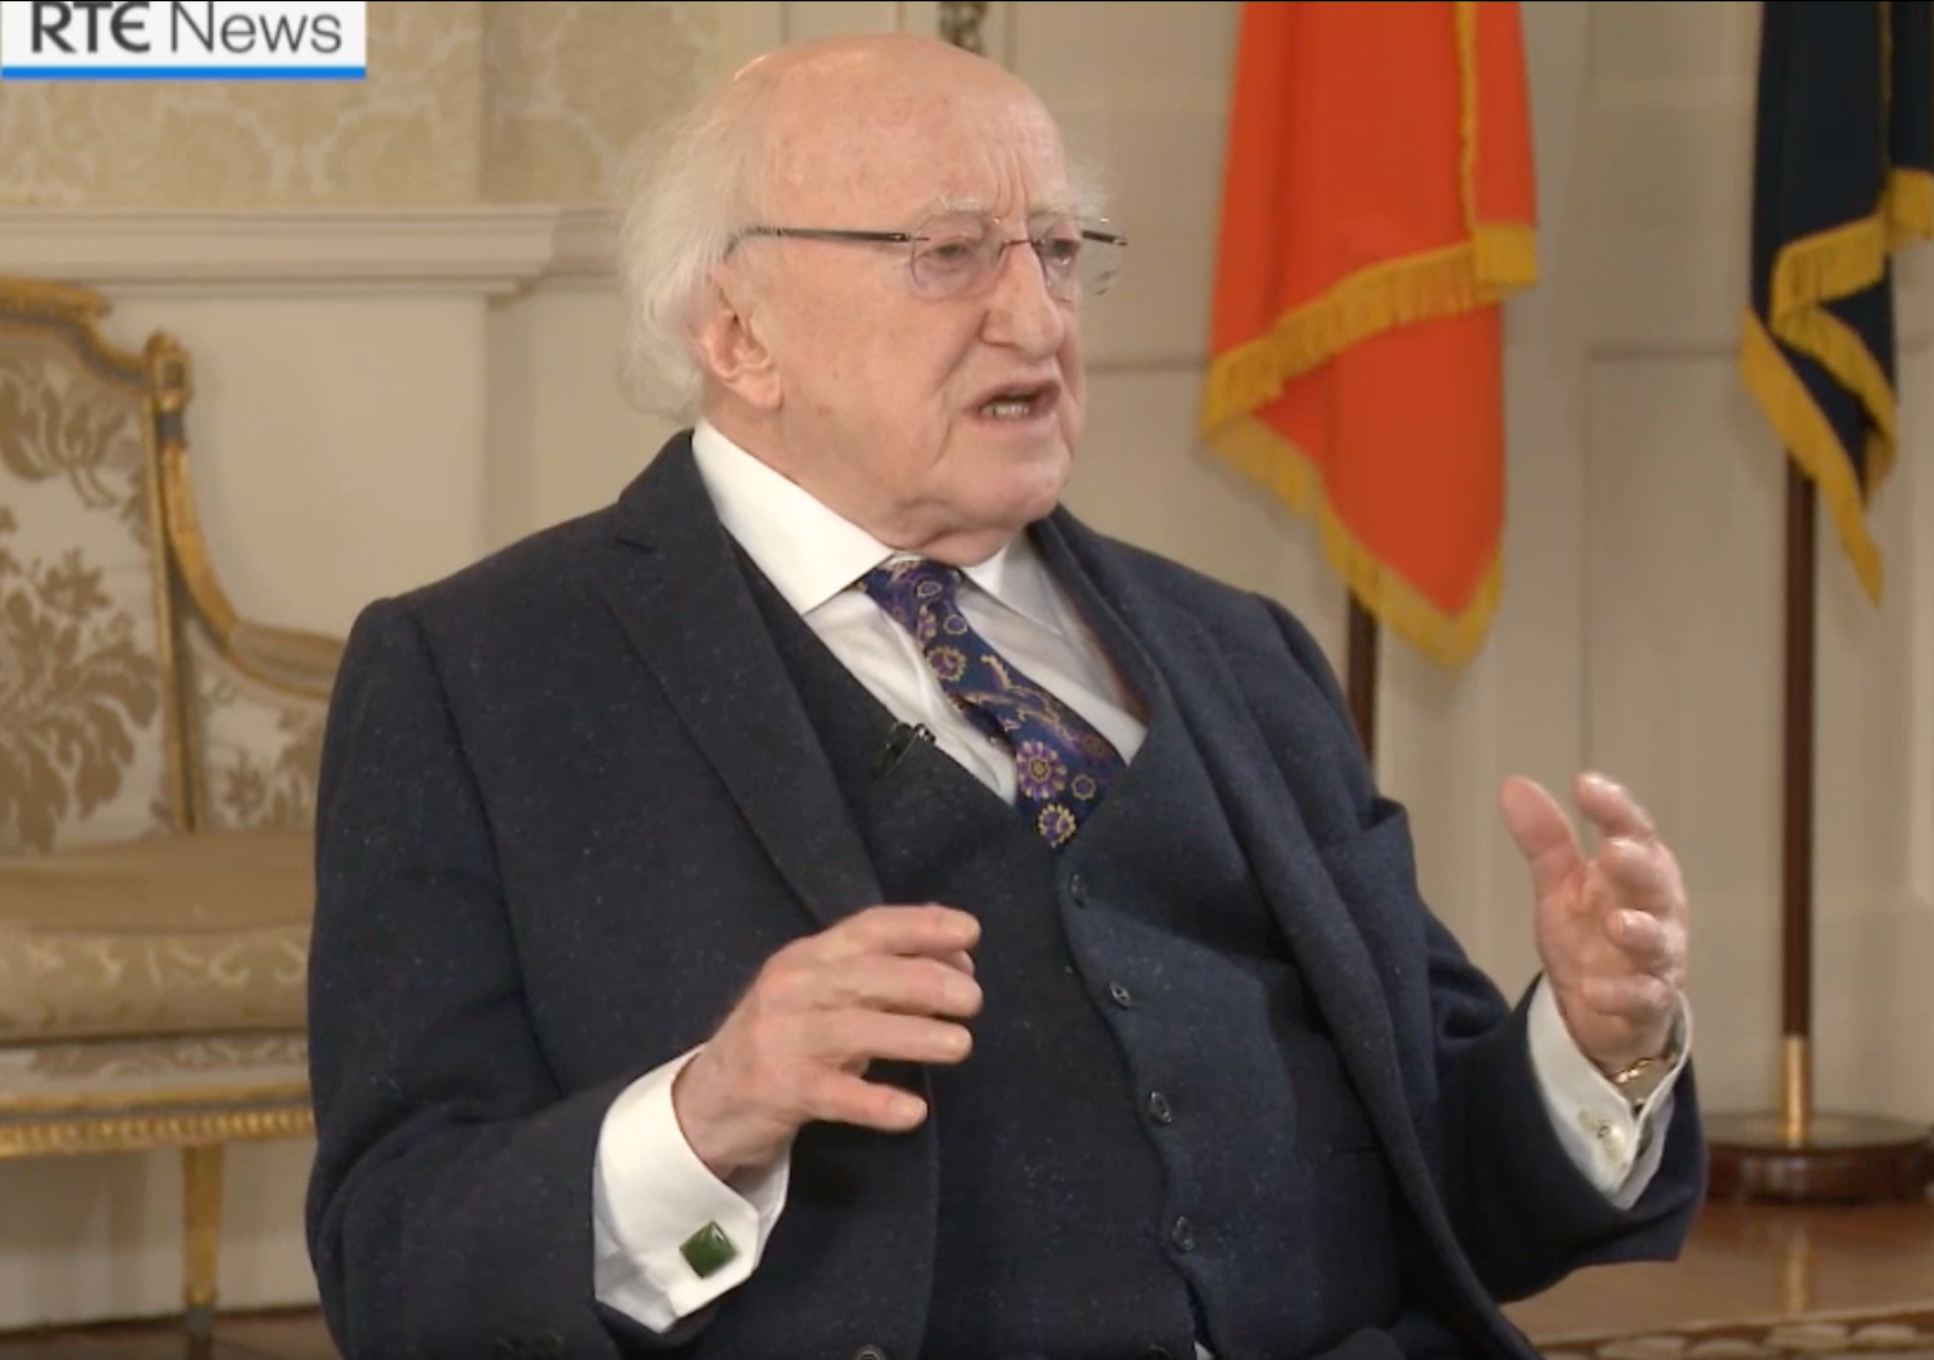 Michael D Higgins speaks to children in County Tipperary for an RTE broadcast